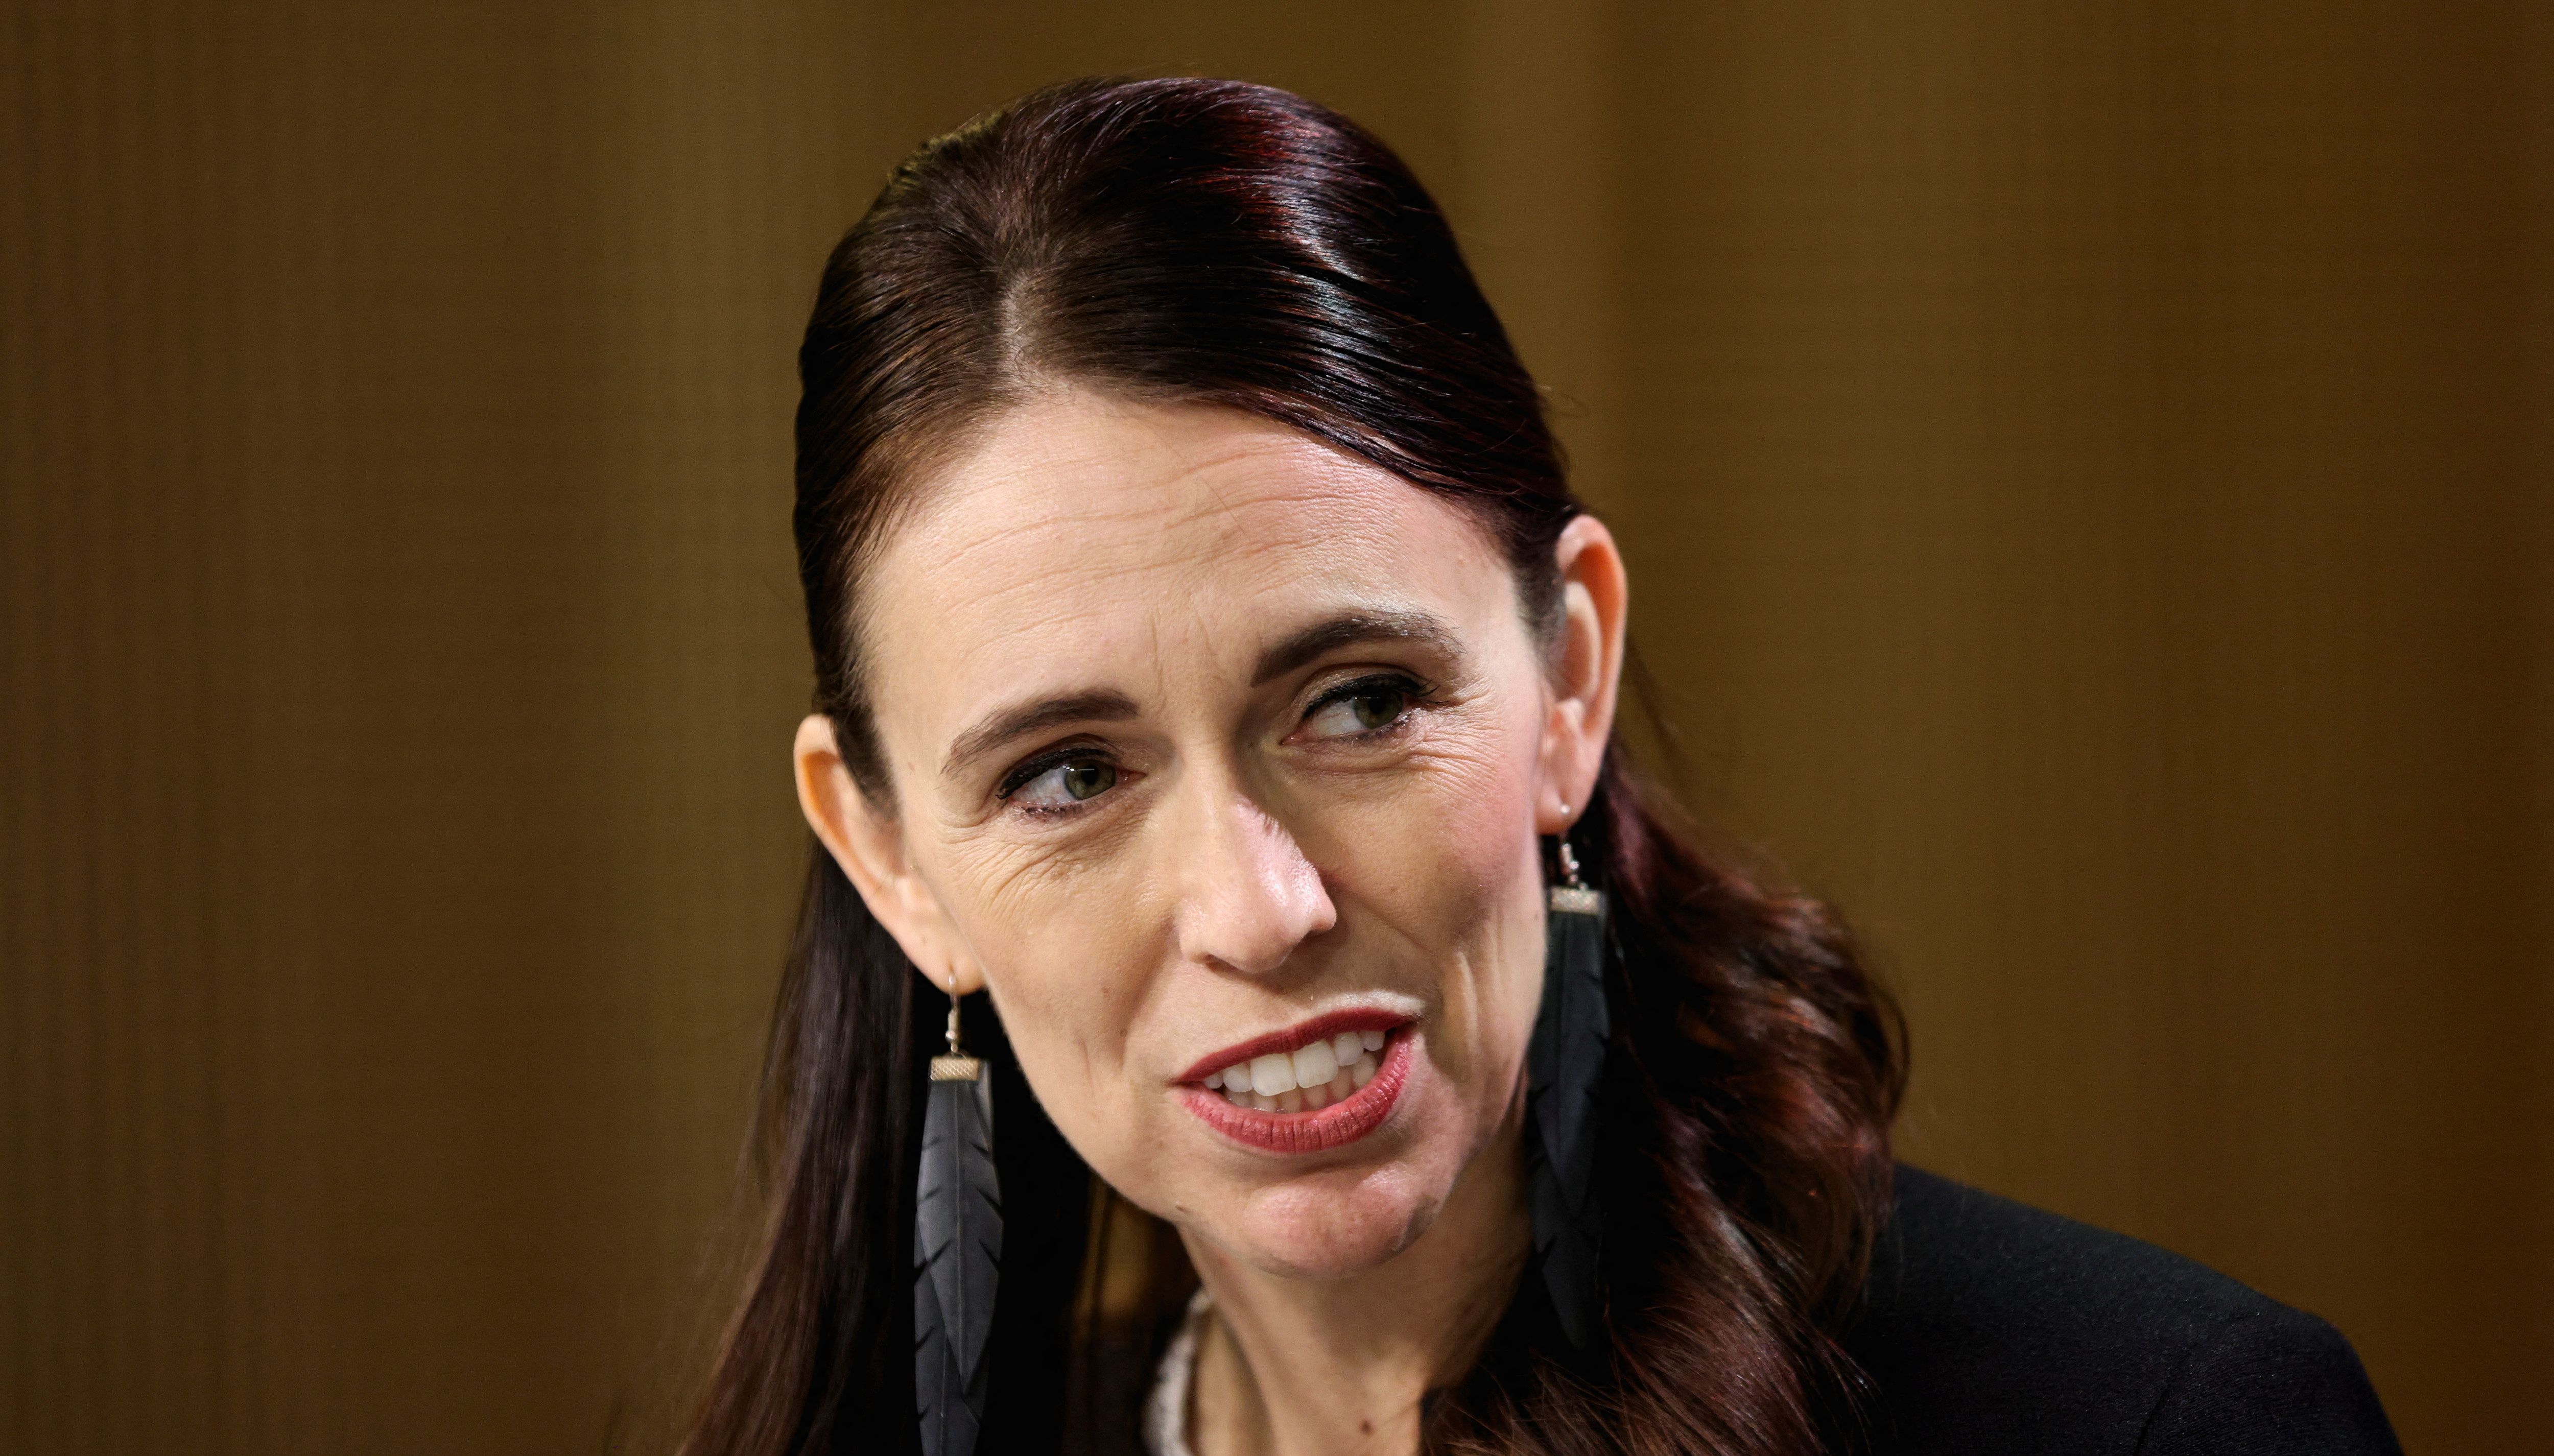 World of Wearable Arts compared Ardern's appearance to ex-PM Helen Clark's appearance in 2002.